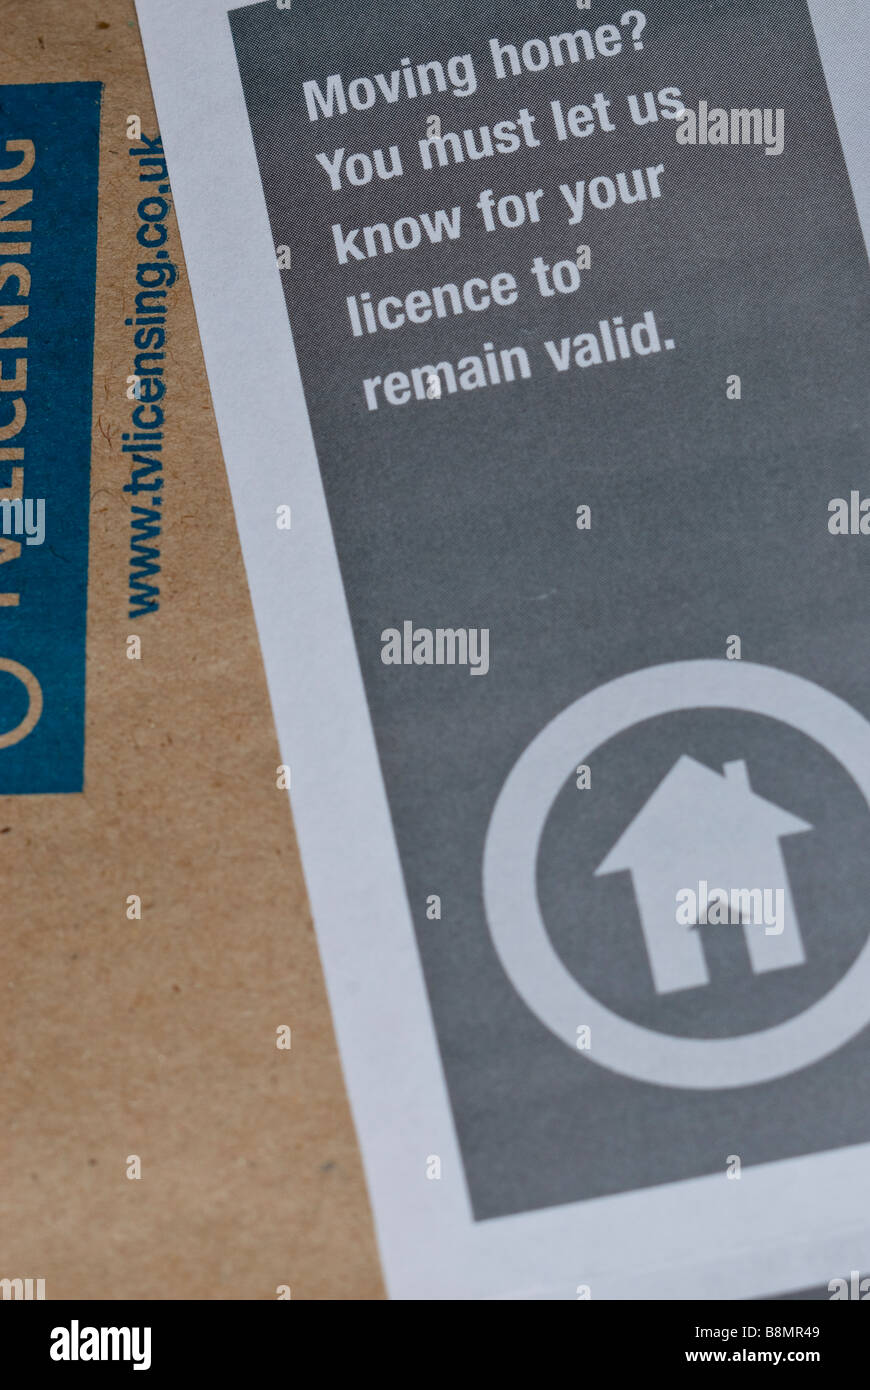 A close up of a uk tv television licence stating if you move home you must inform them for your licence to remain valid Stock Photo